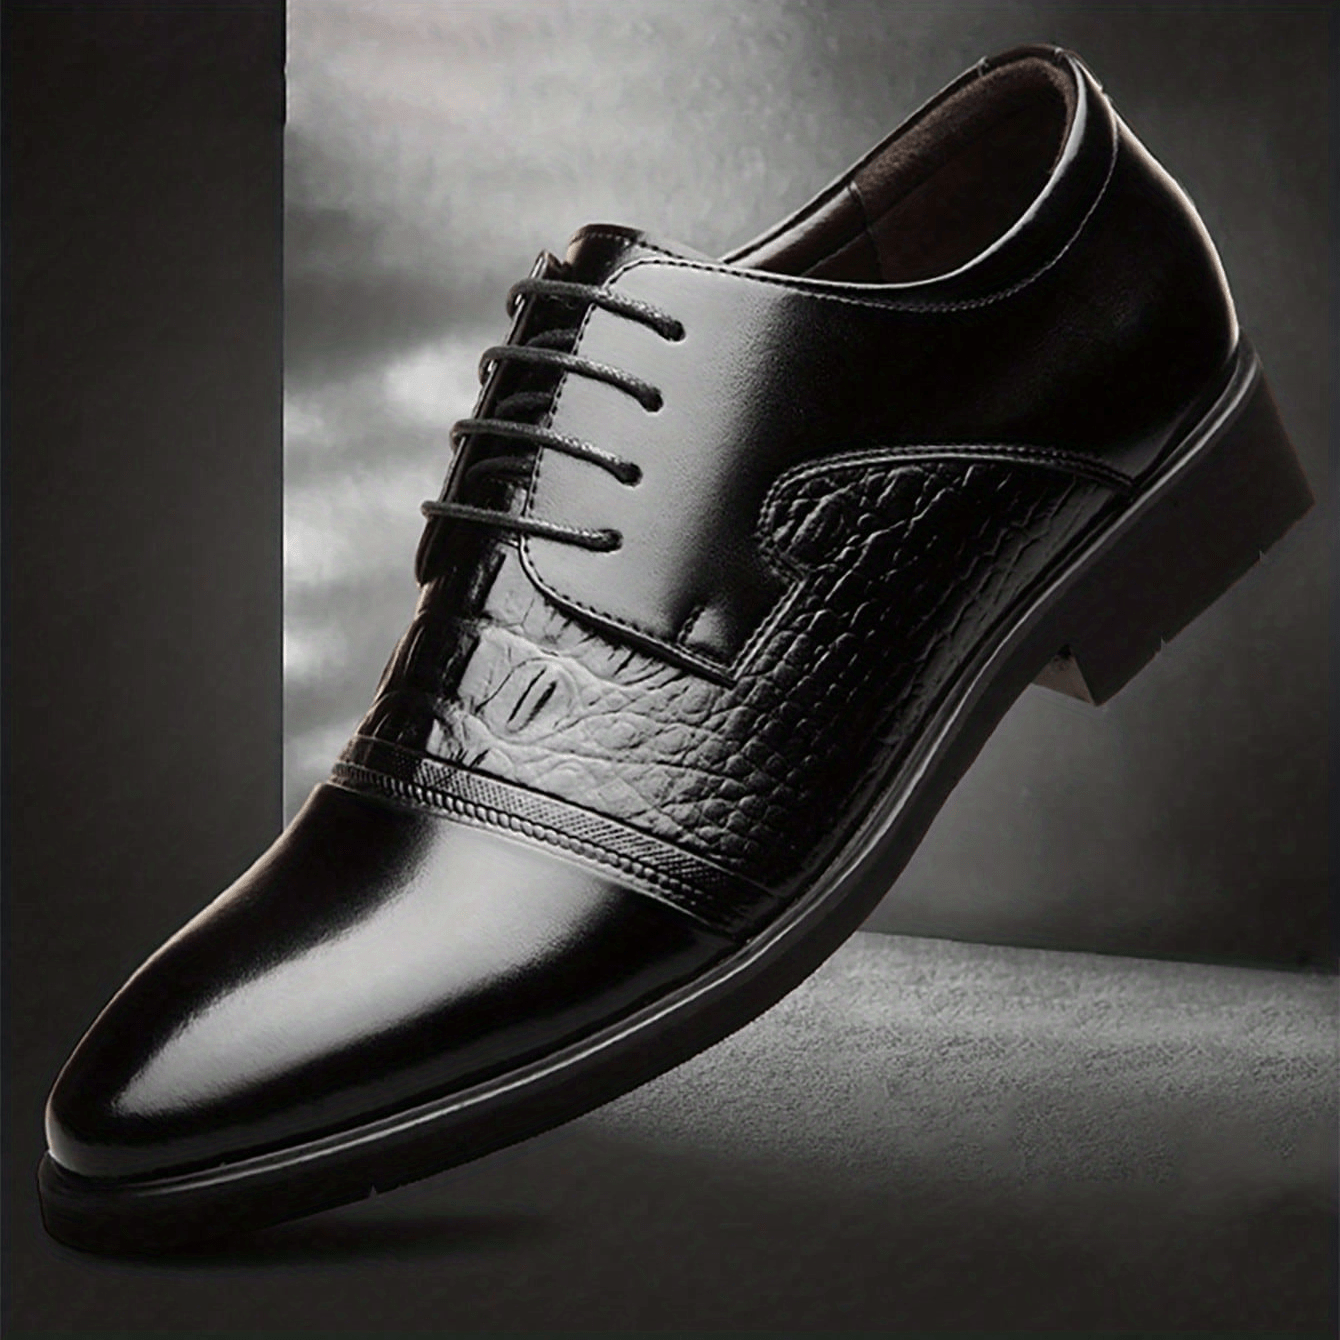 LUXURY FORMAL SHOES